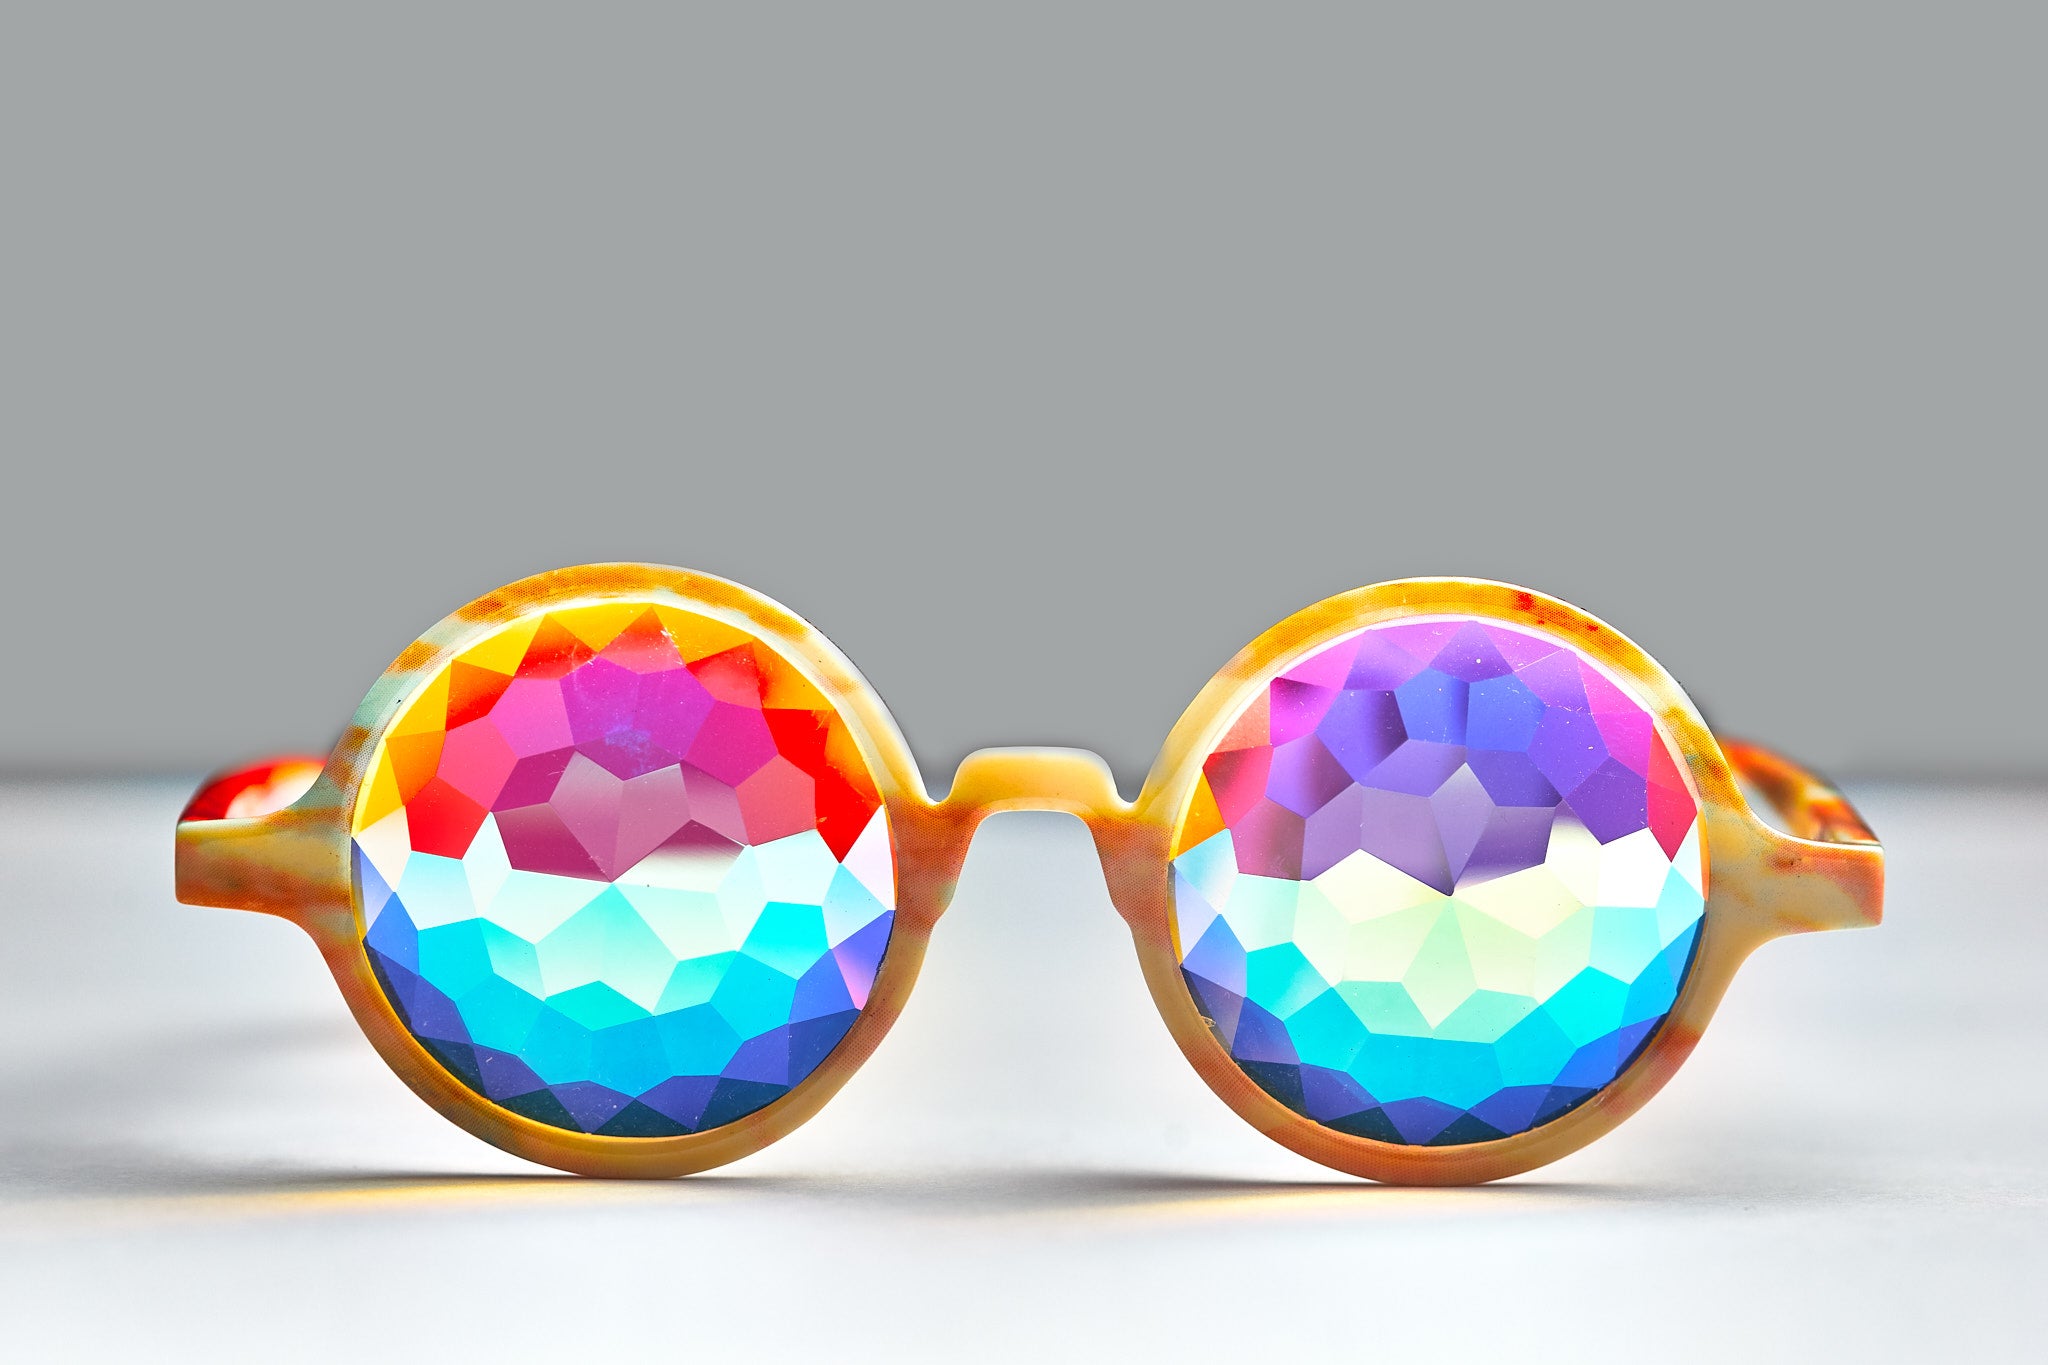 Intense Diamond Kaleidoscope Effect rainbow crystal lens Sunglasses Women Men Party Festival Orange Marble Round Glasses at SuperFried's Festival Accessories and Sunglasses Online store